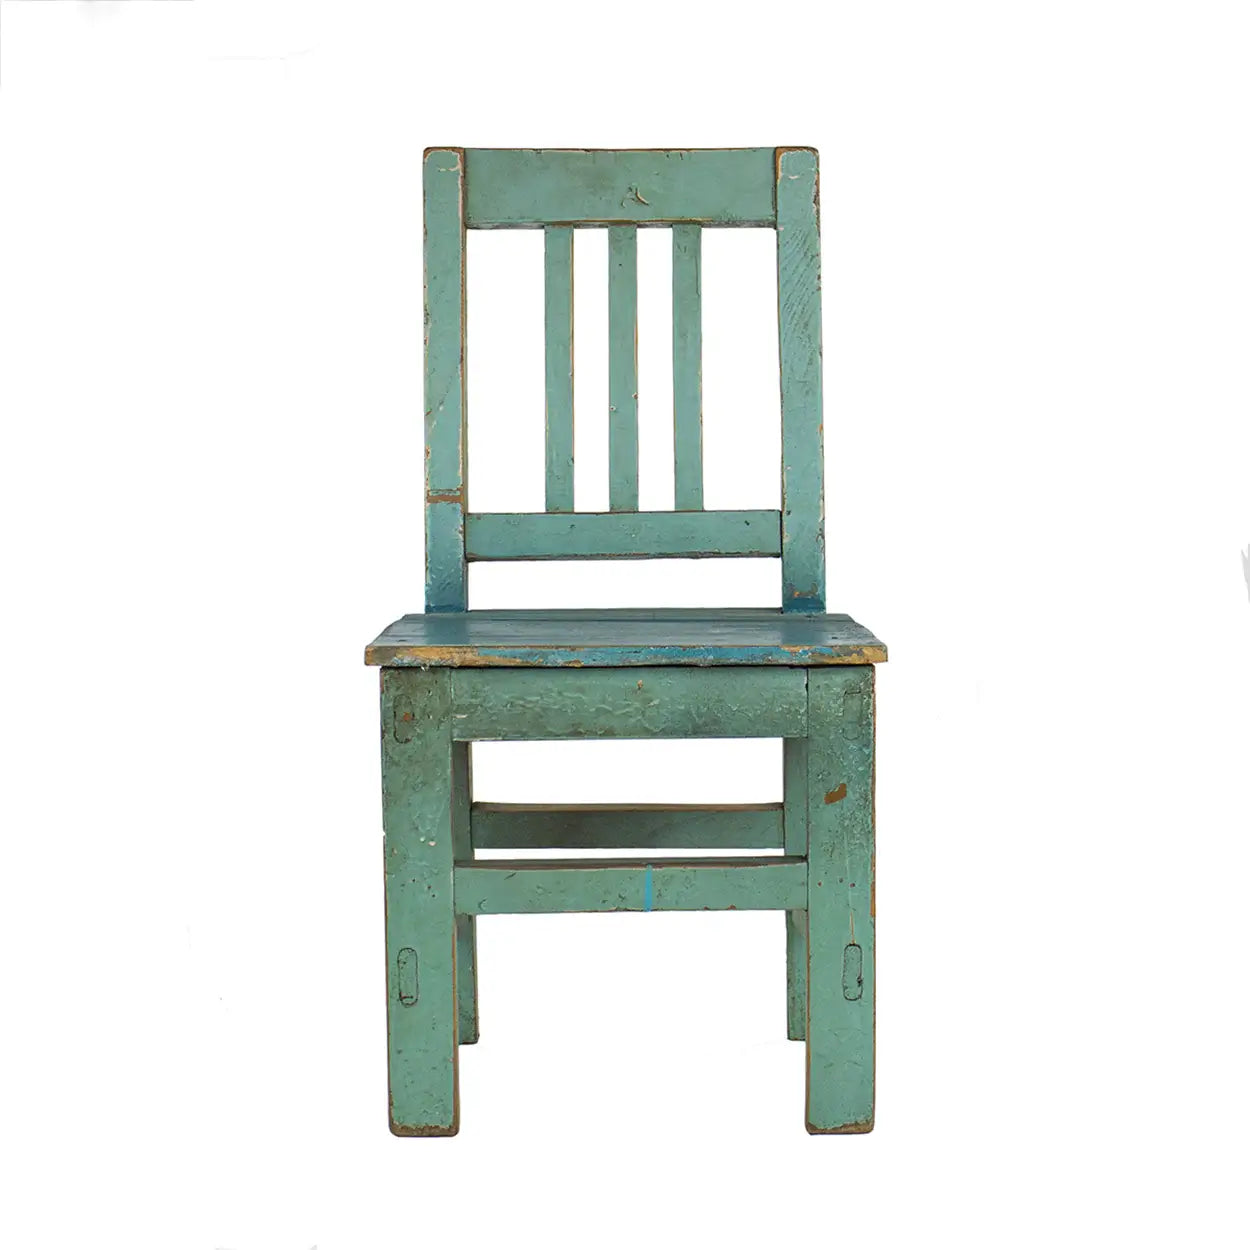 Child's chair painted vintage green and distressed. 